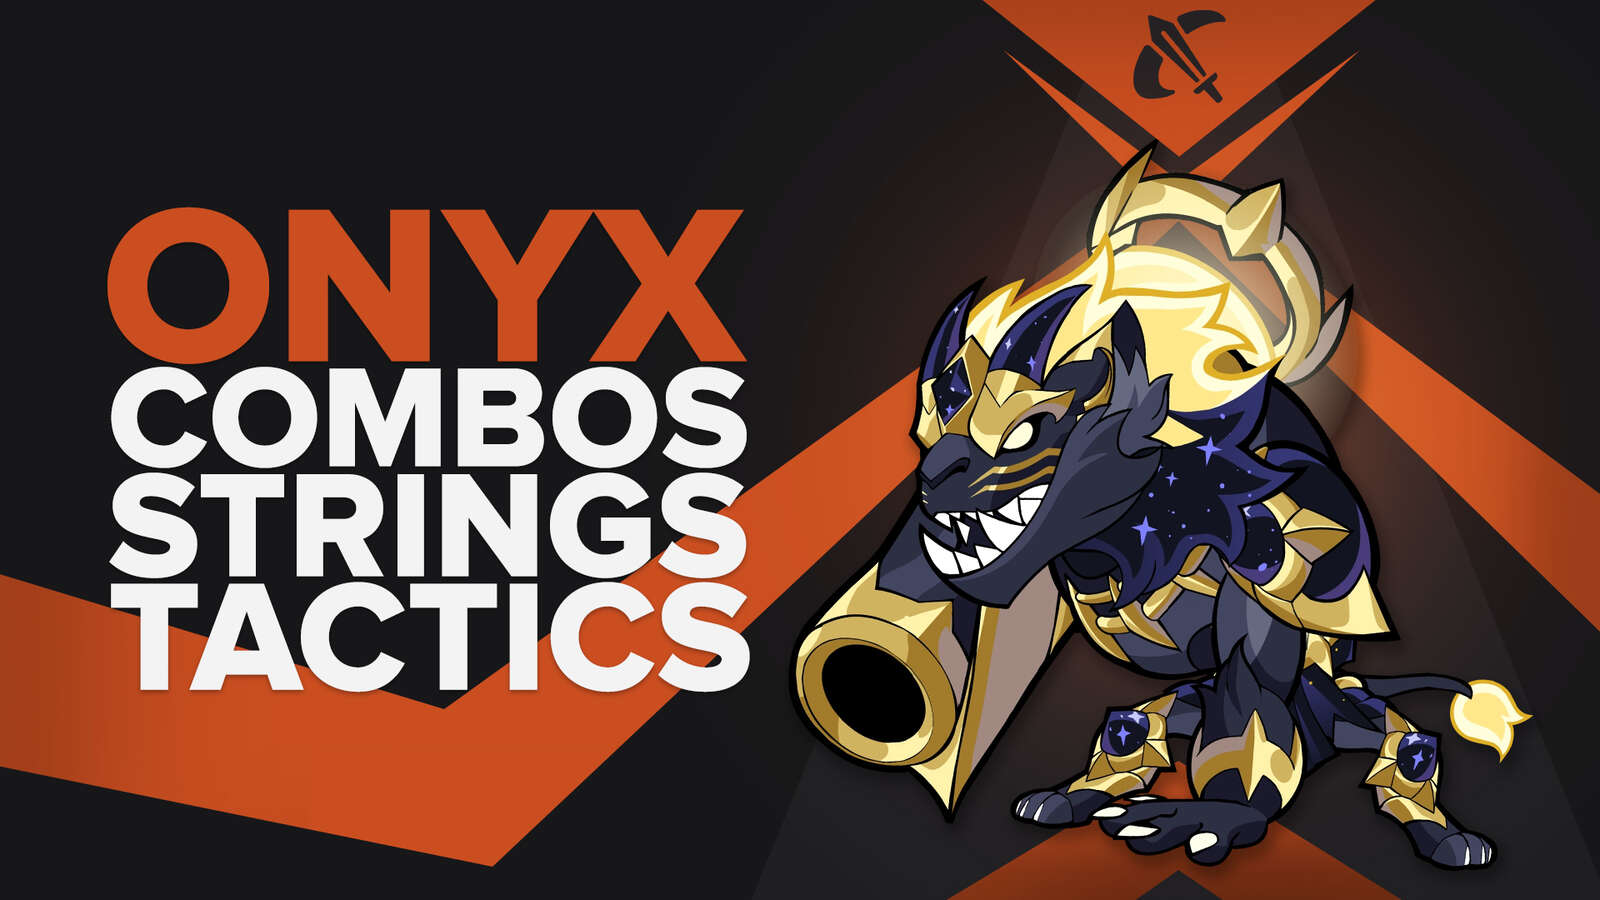 Best Onyx combos, strings, and combat tactics in Brawlhalla